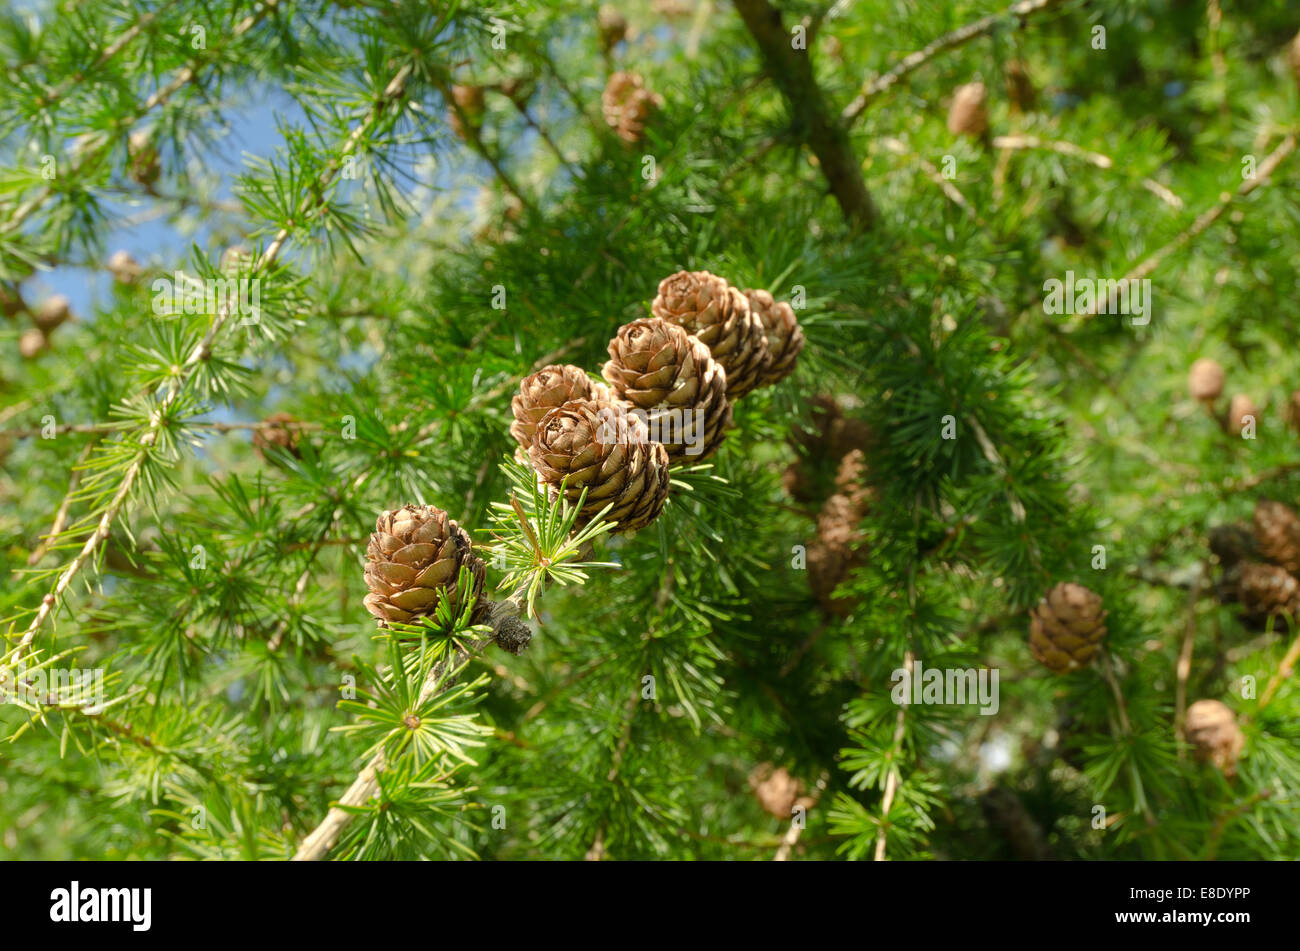 fresh lush greens of deciduous larch tree heavily laden with lots of ripe pine cones on rows of branches pointing upwards Stock Photo